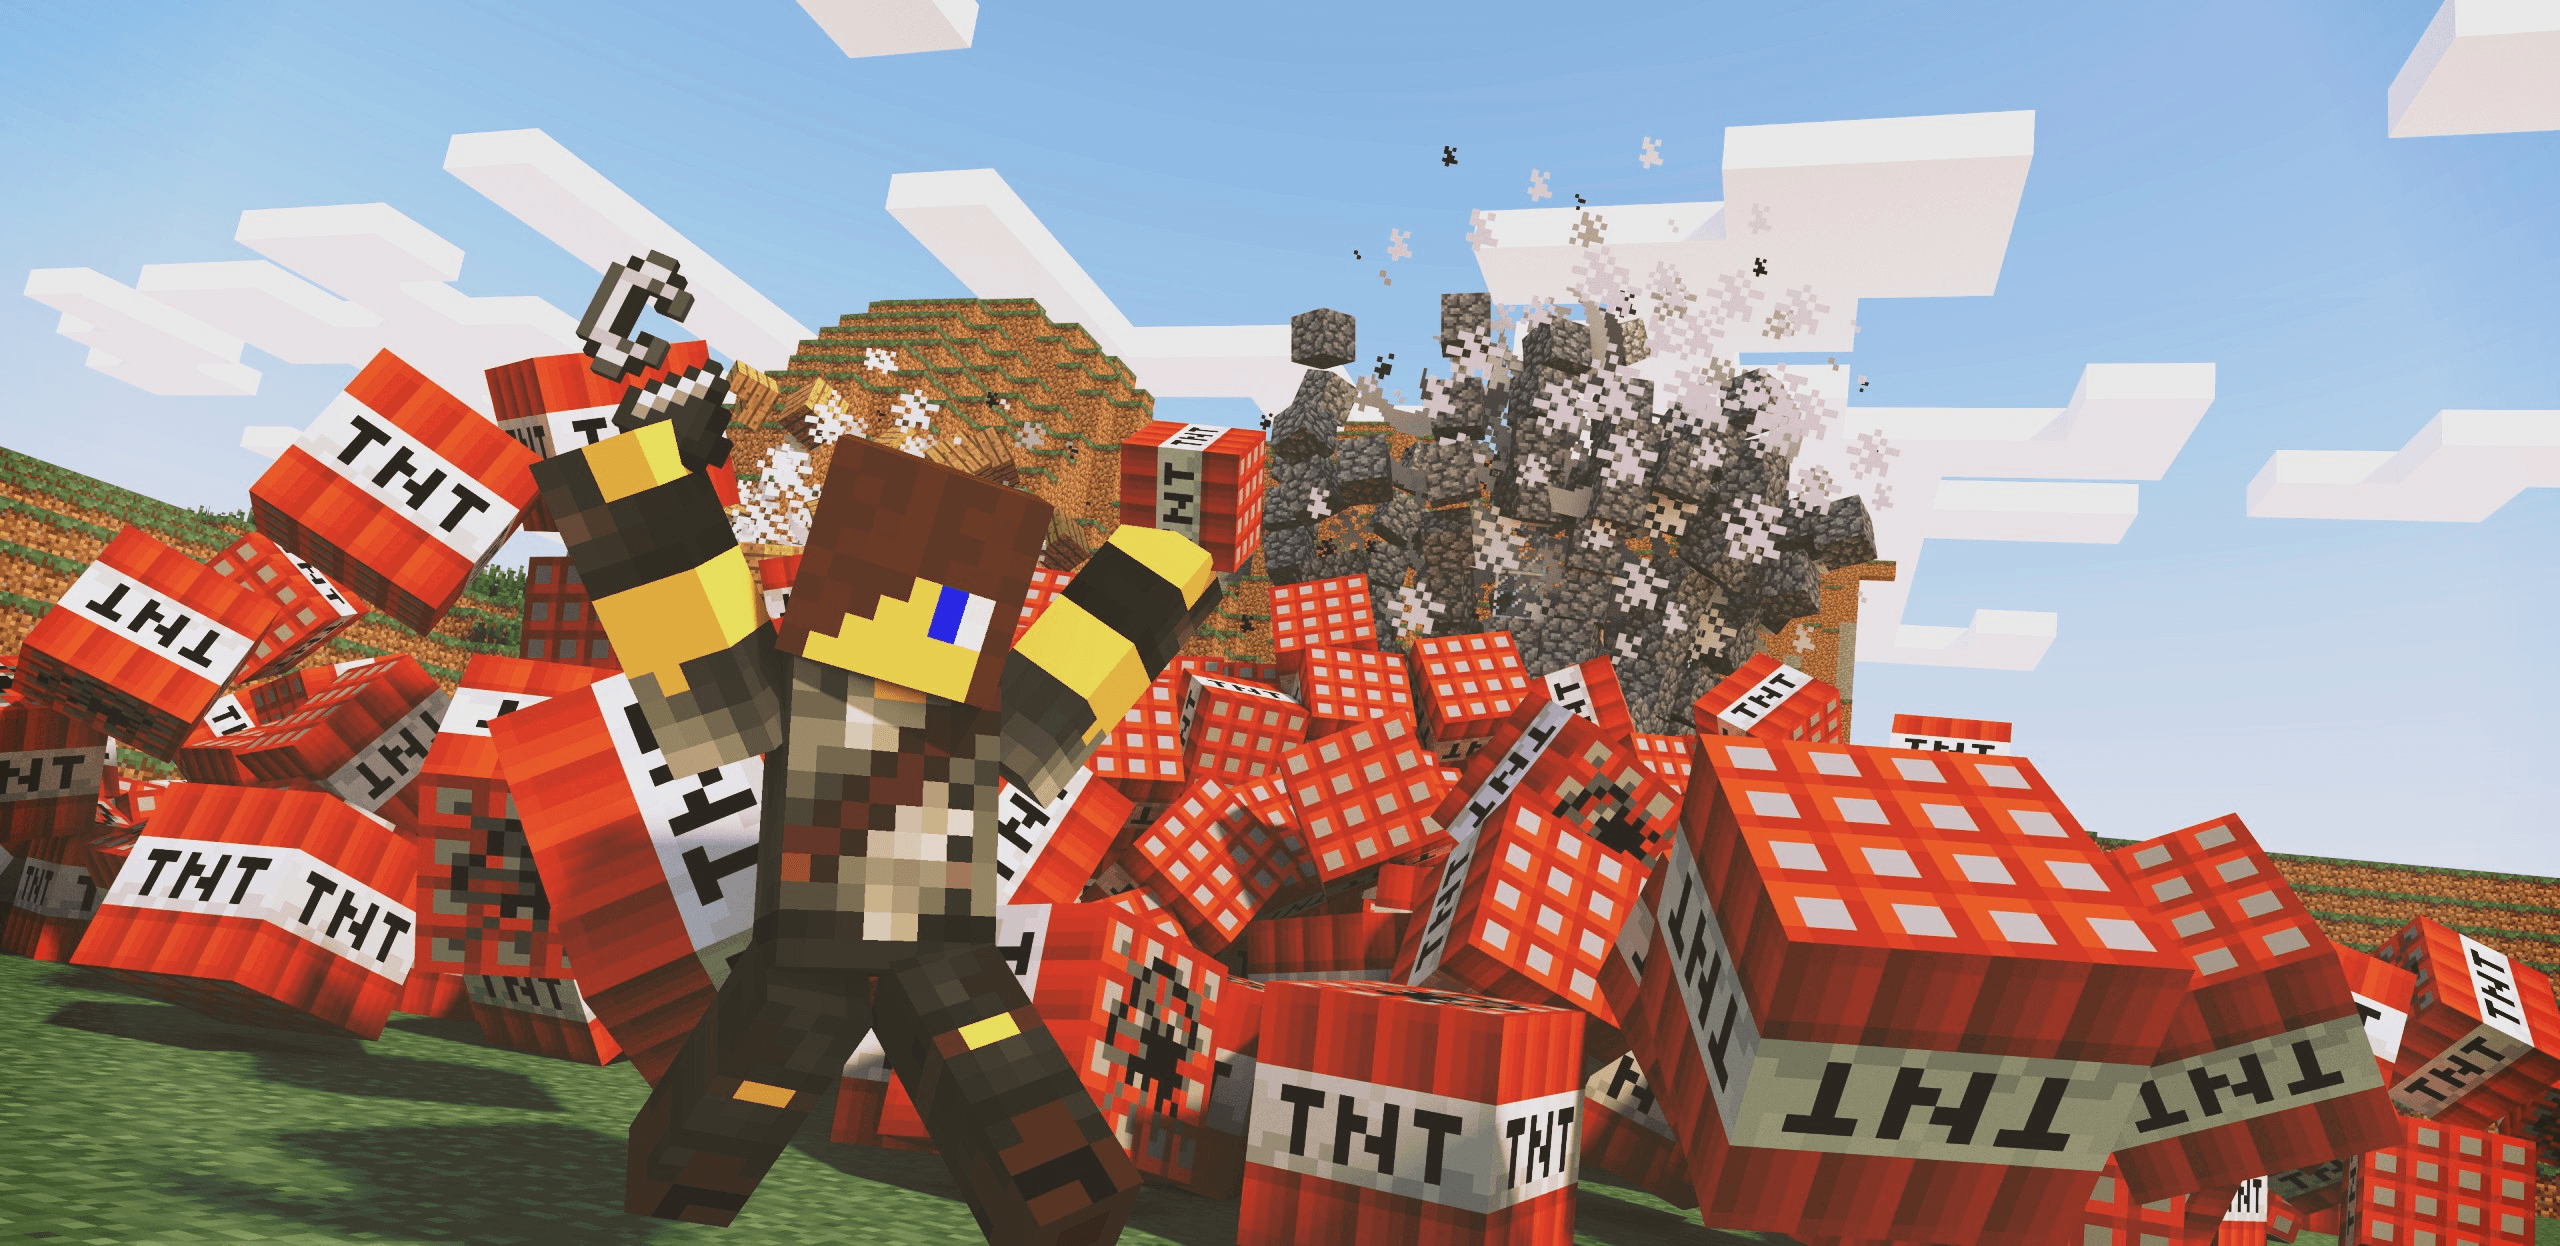 Minecraft Tnt Wallpaper Related Keywords & Suggestions